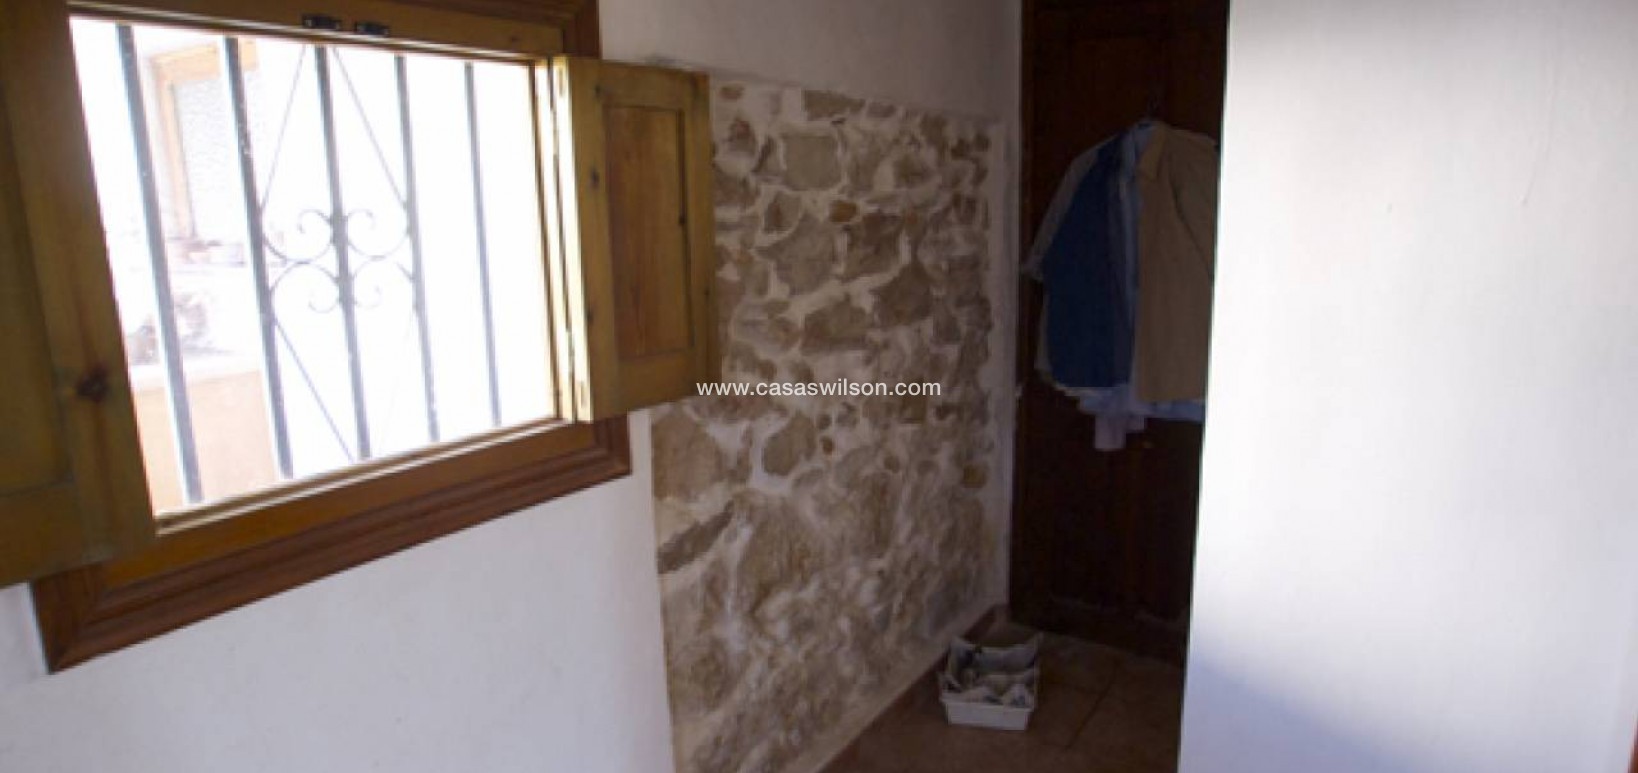 Sale - Country Property/Finca - Rojales